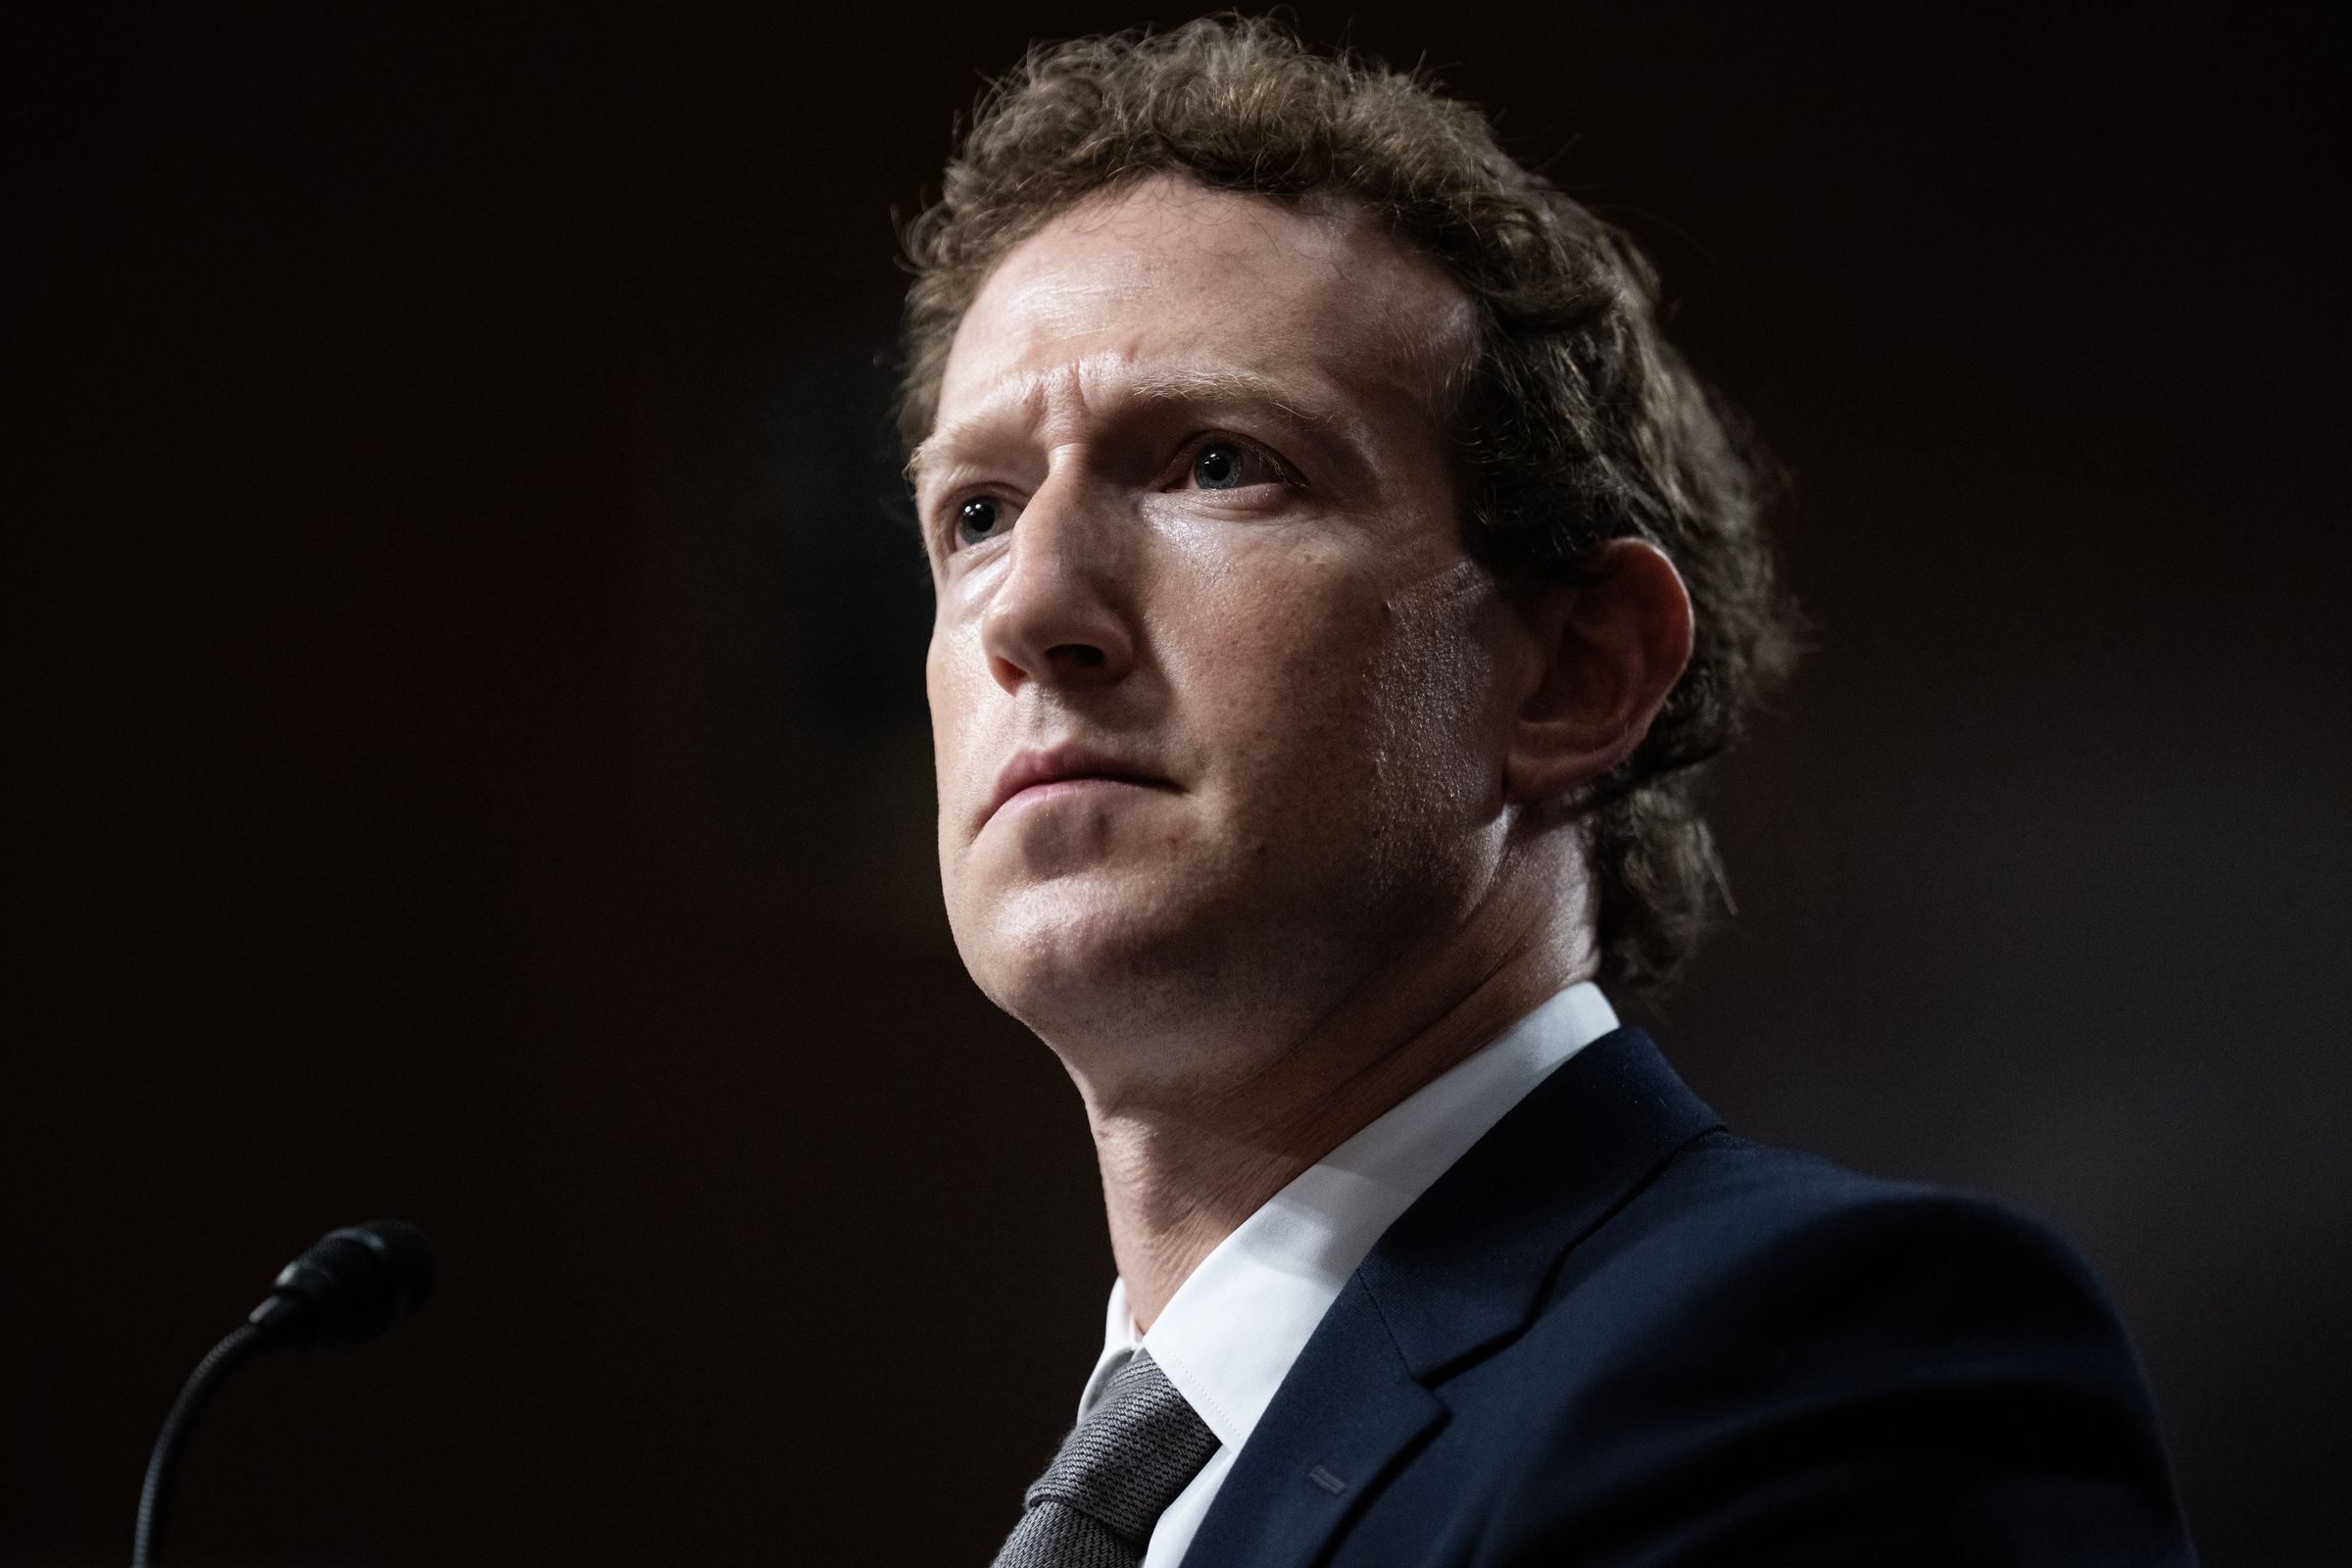 Mark Zuckerberg testifying at the Senate hearing titled “Big Tech and the Online Child Sexual Exploitation Crisis.”